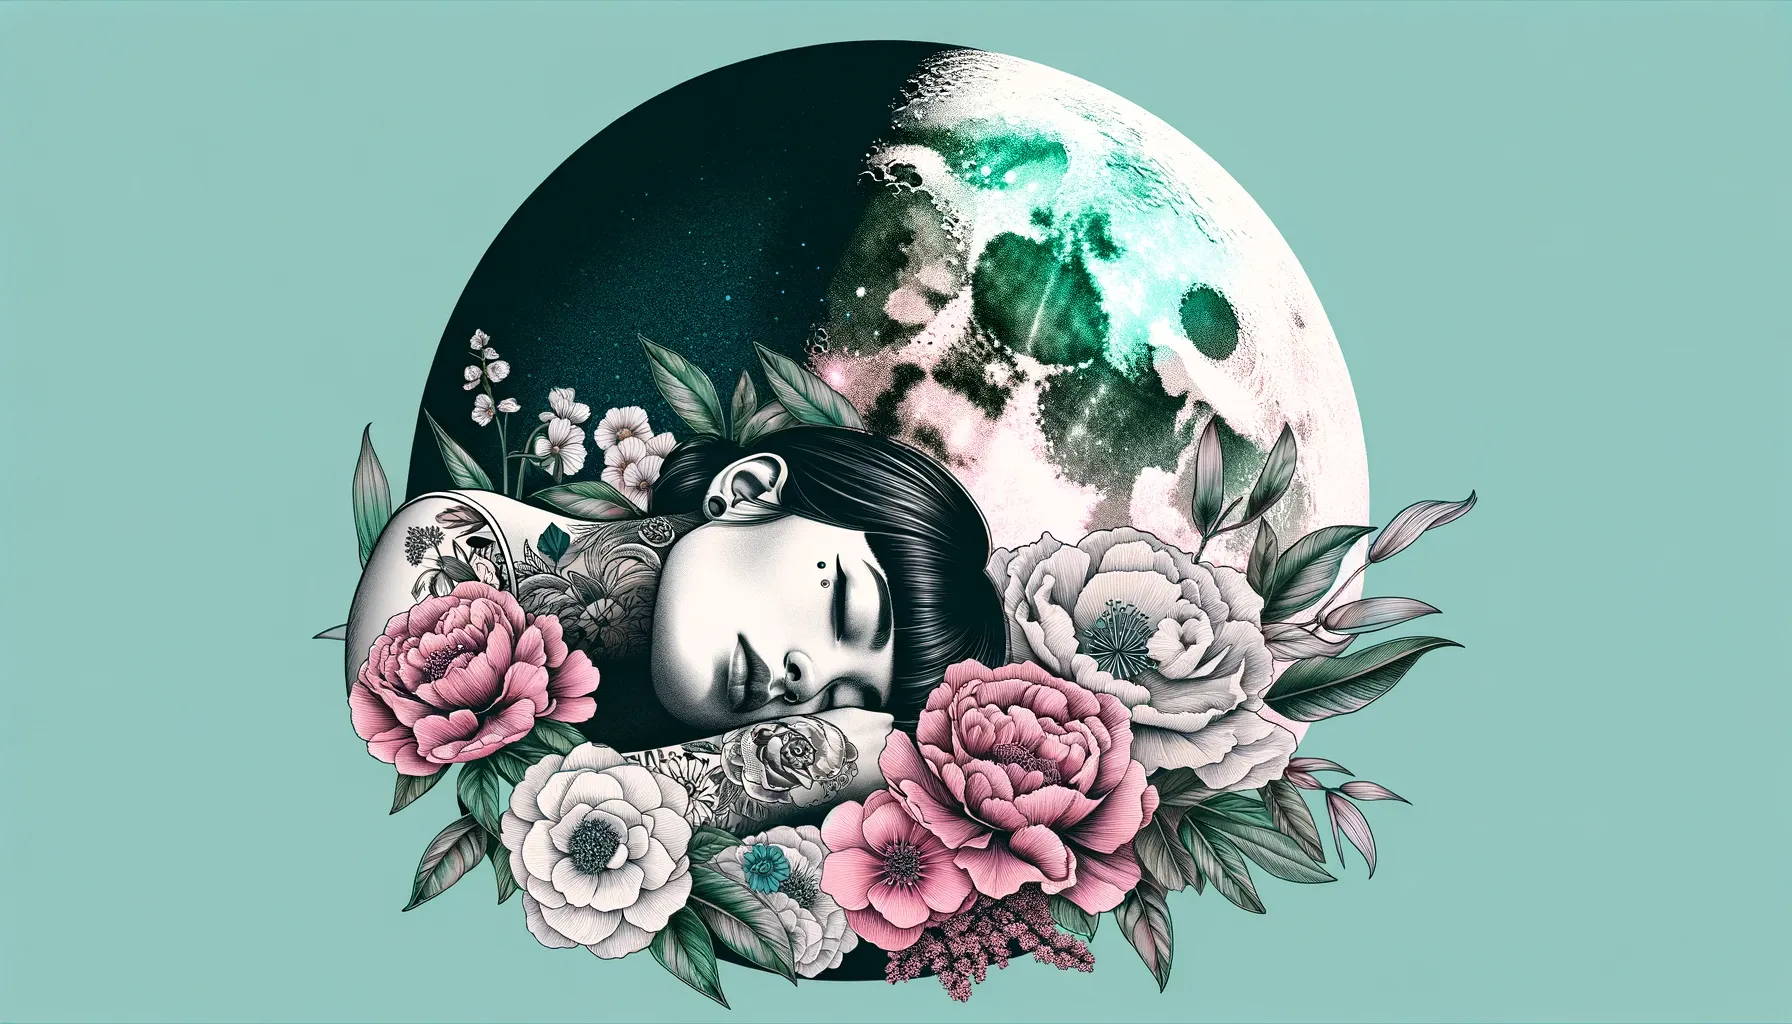 An illustration of a portrait of a woman with tattoos sleeping among flowers in front of the First Quarter Half Moon.